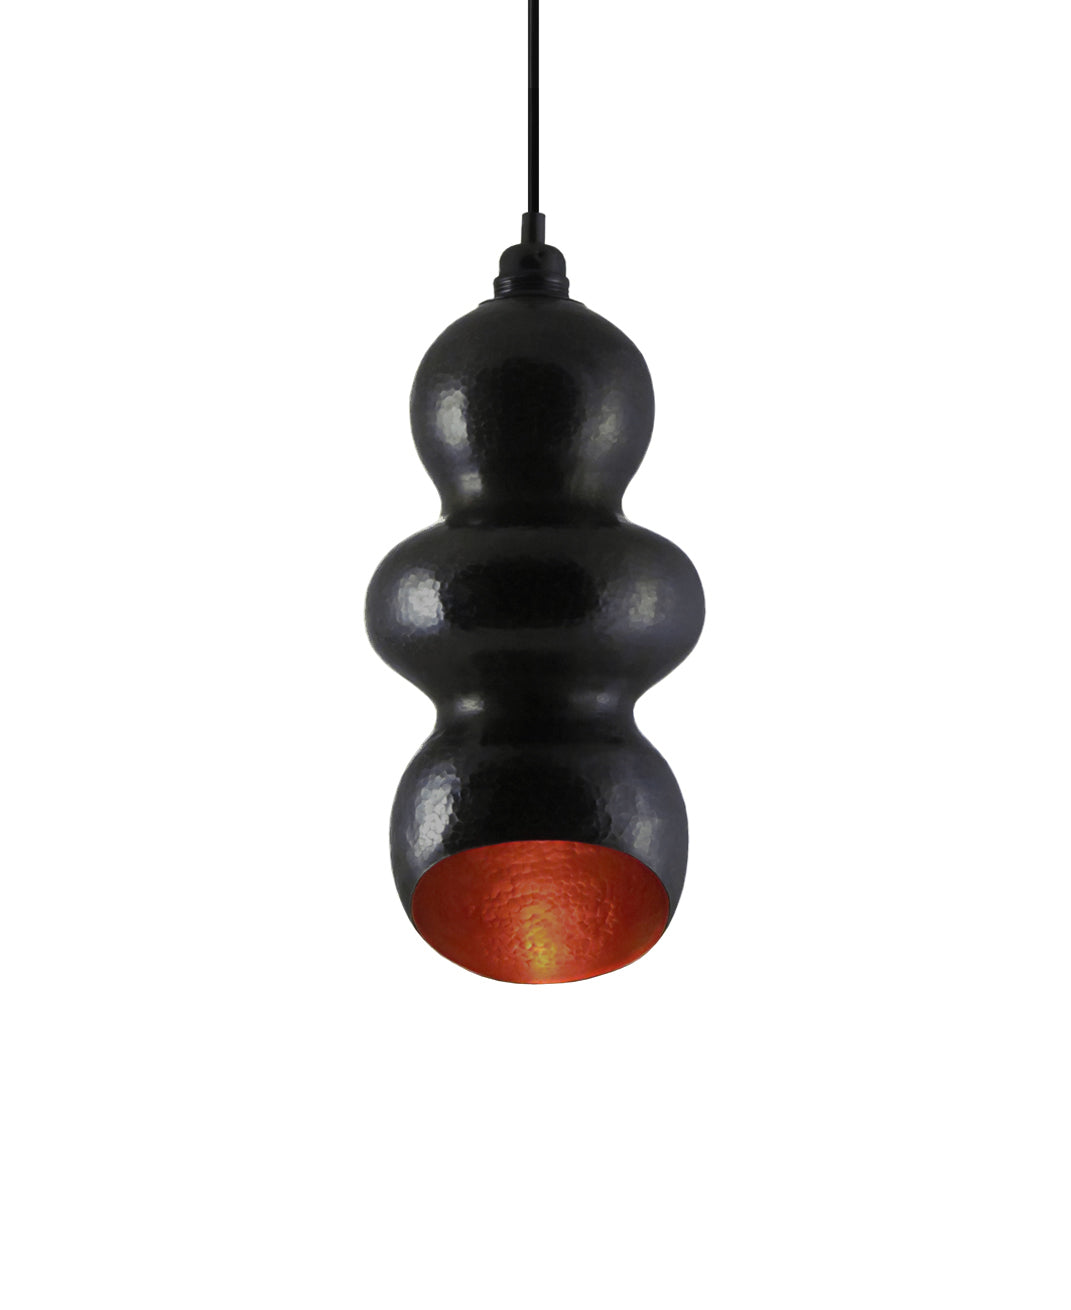 Beautiful modern hand made Tamarind shaped copper pendant lighting in a charcoal gray patina